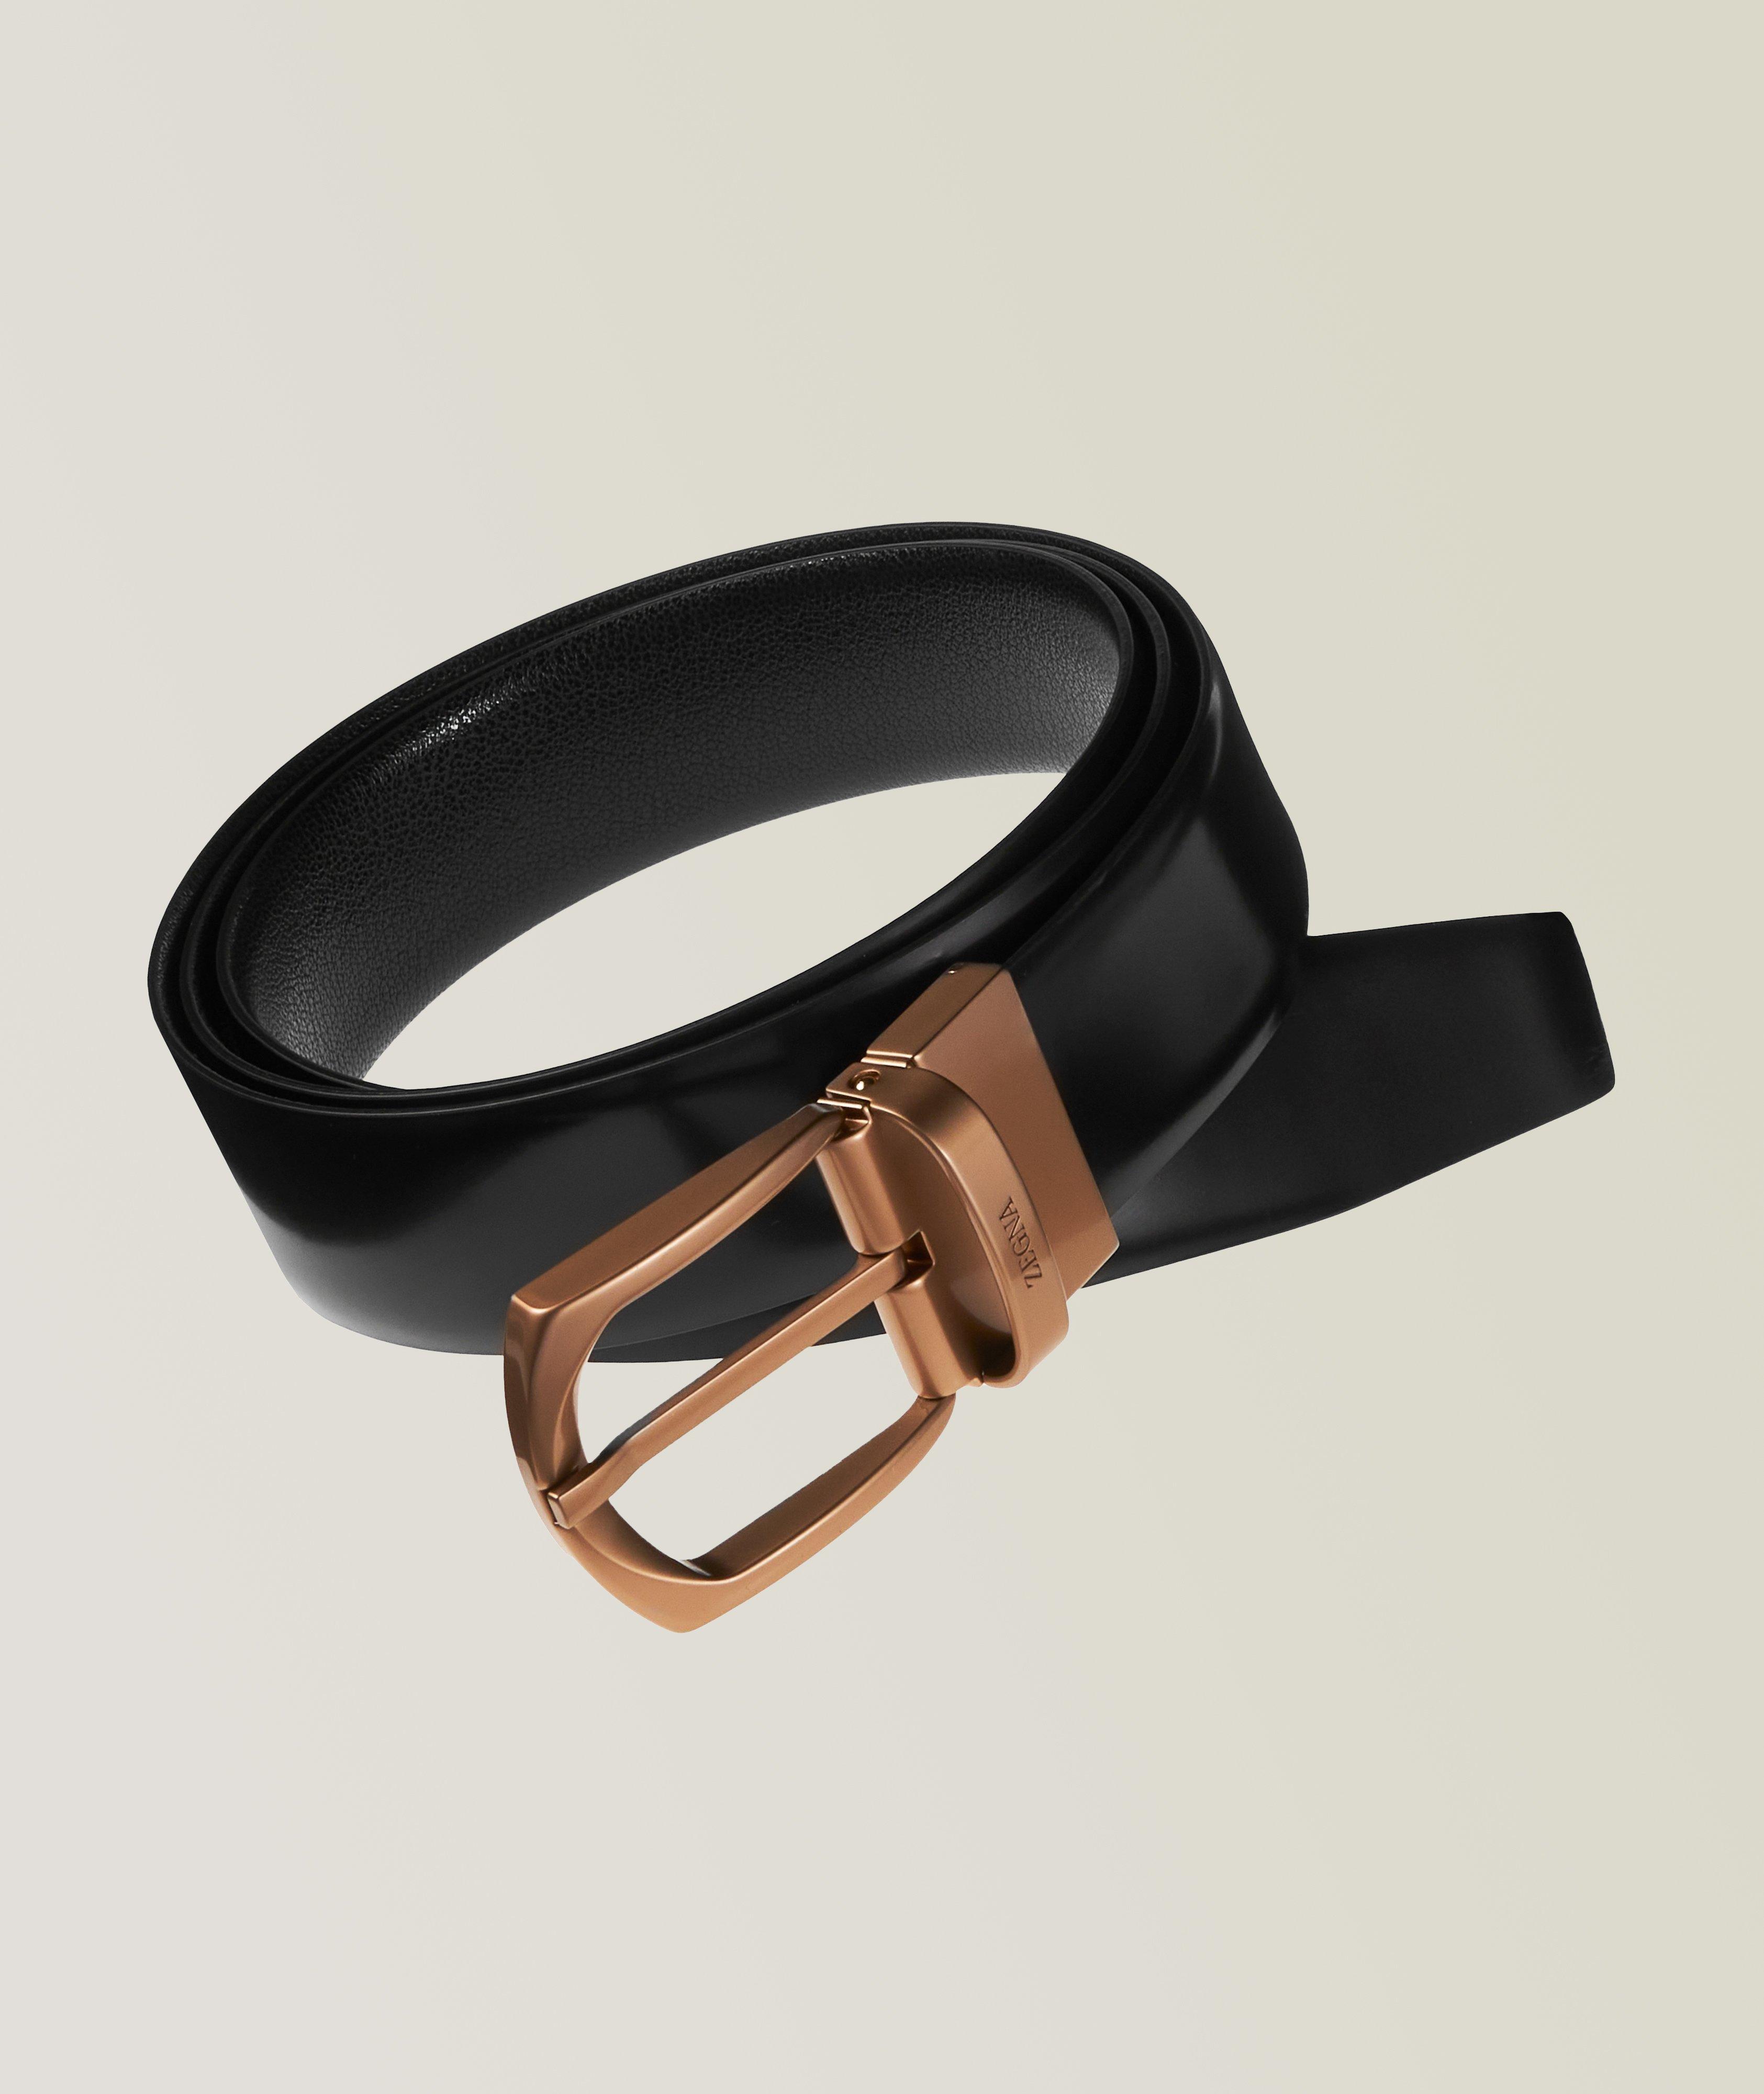 Reversible Calf Leather Pin-Buckle Belt image 0